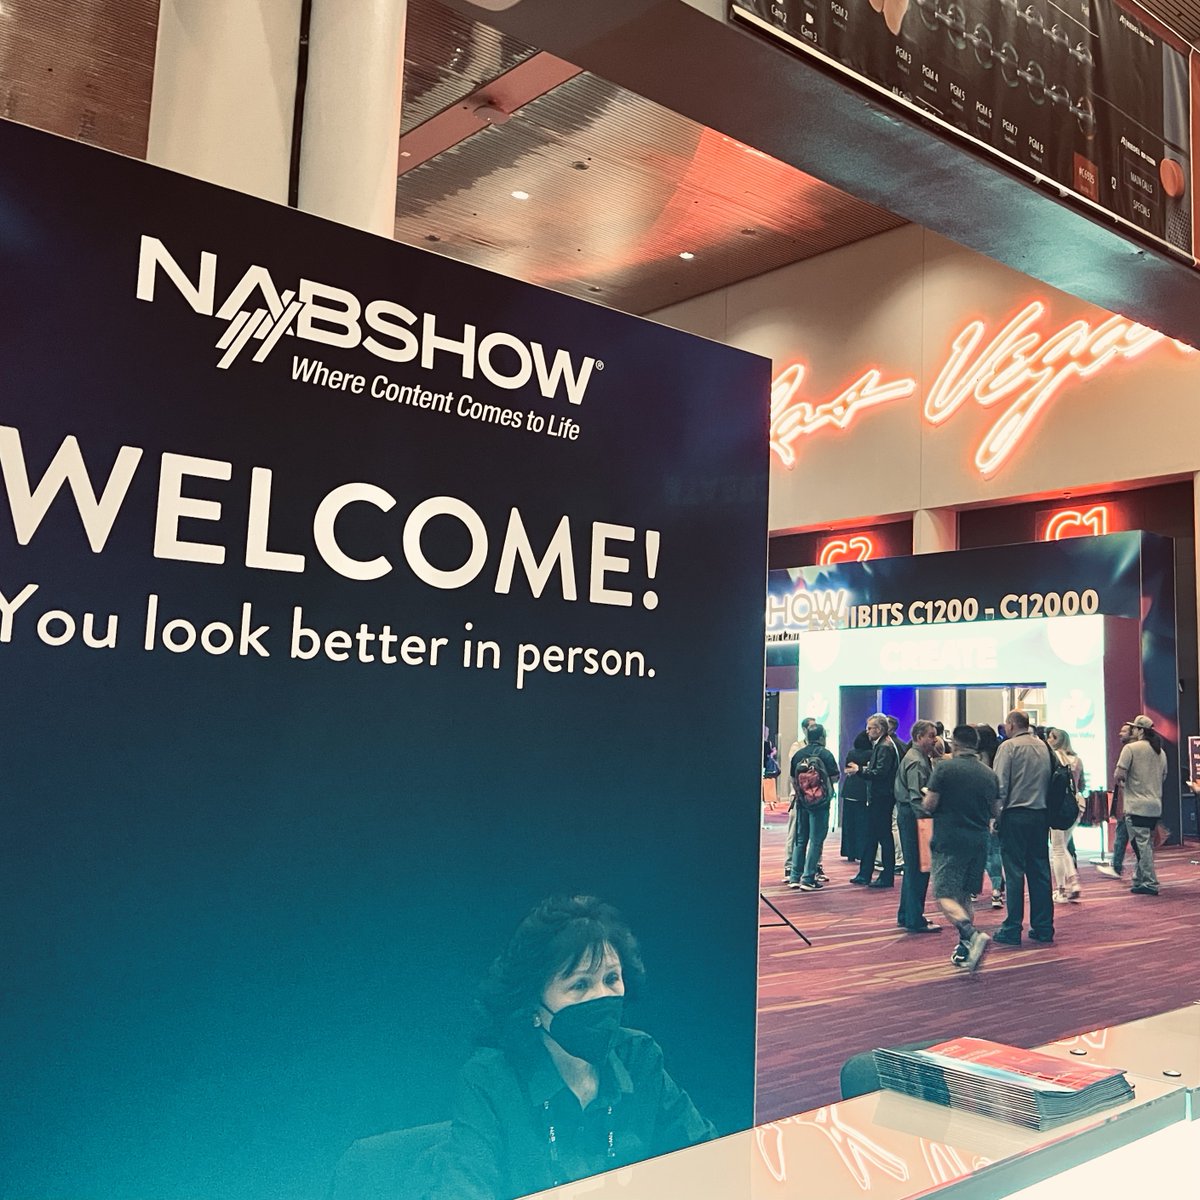 Great to be back visiting the NAB Show this year!